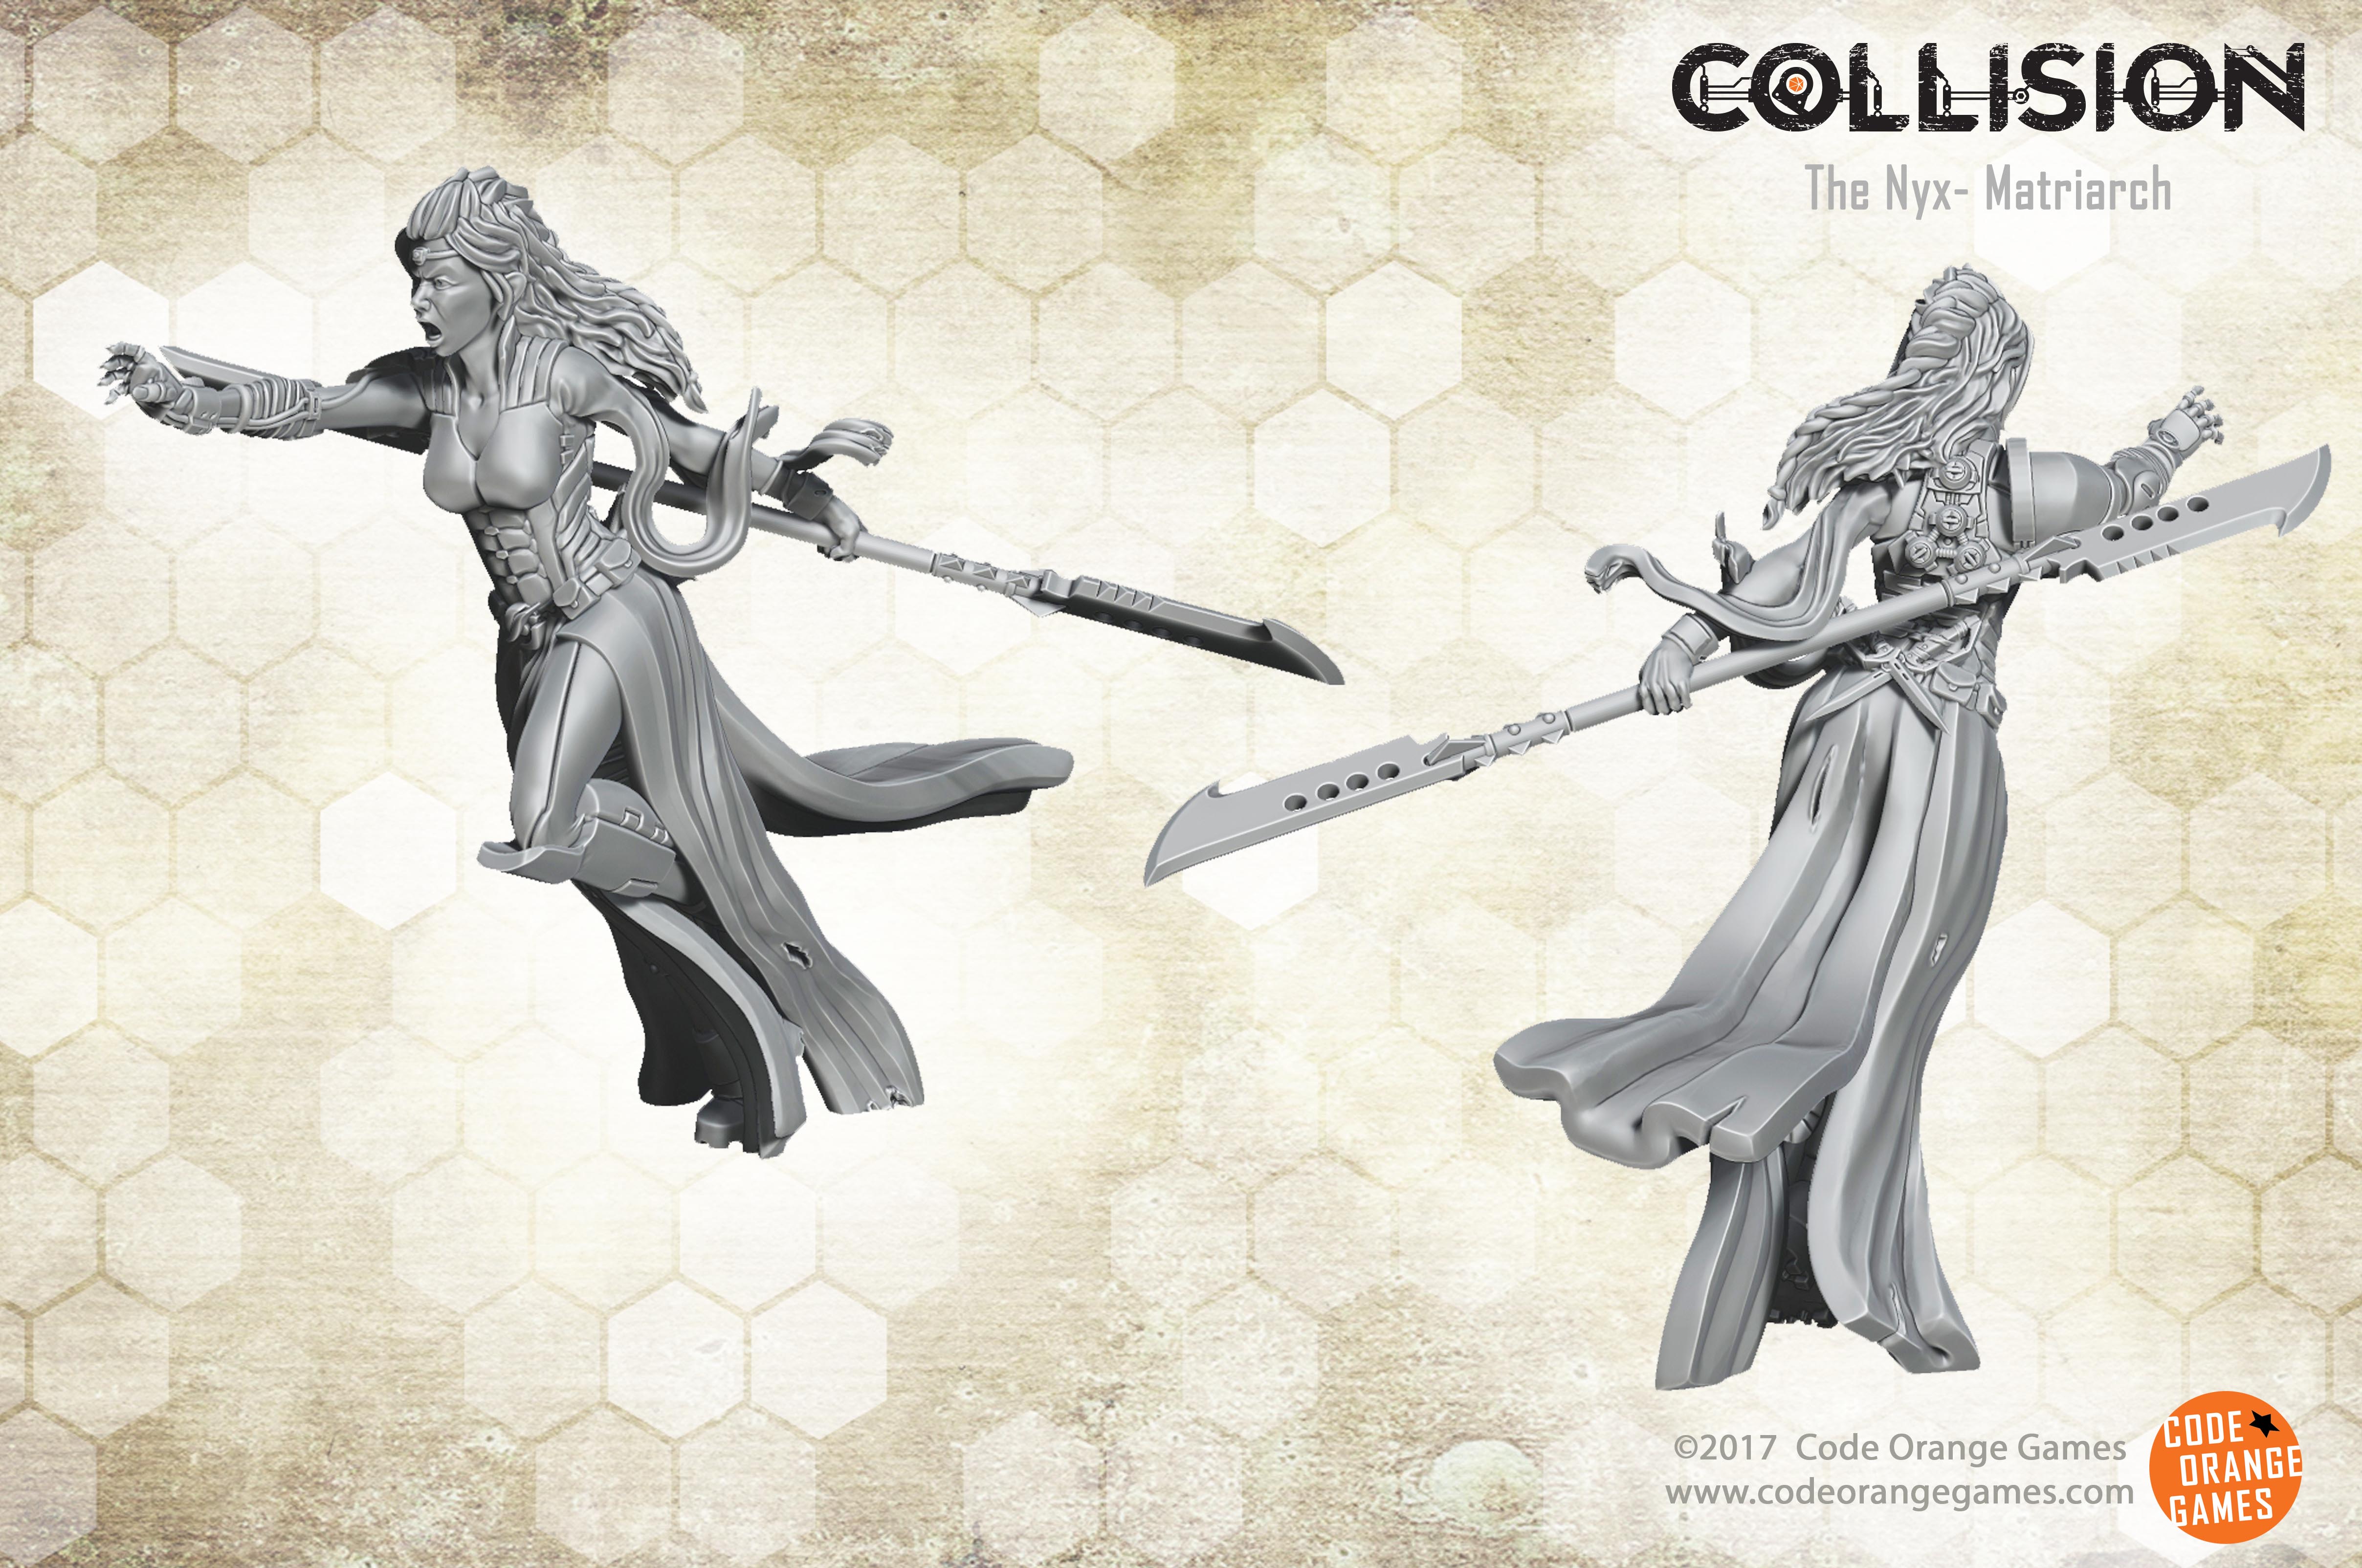 Matriarch for Collision revealed!